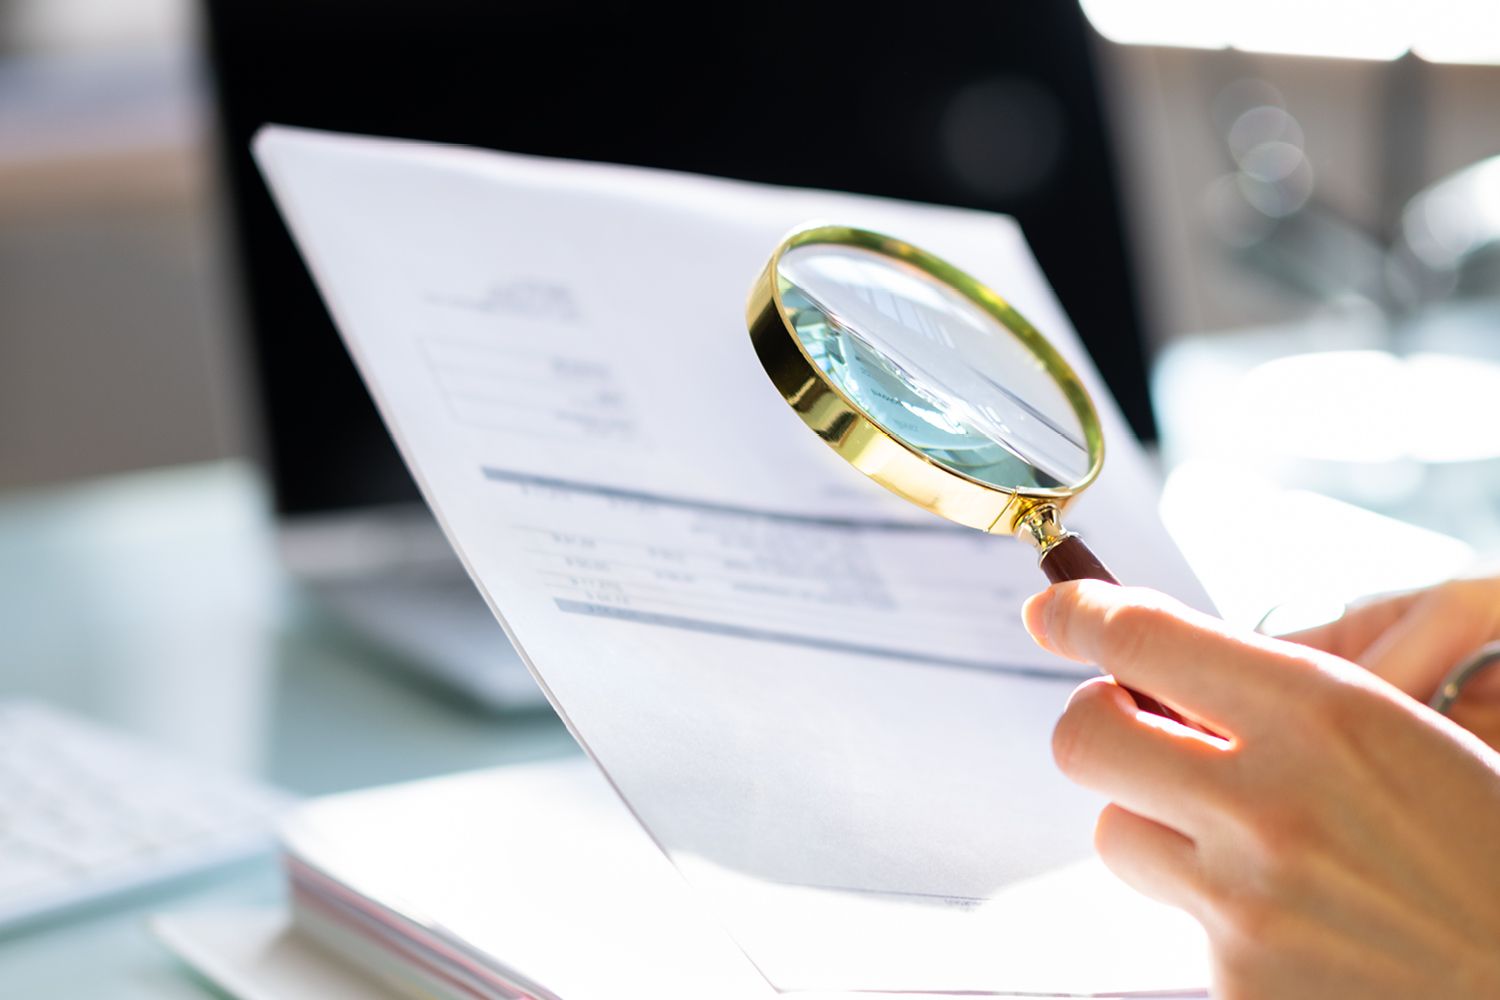 Magnifying glass above a pay slip